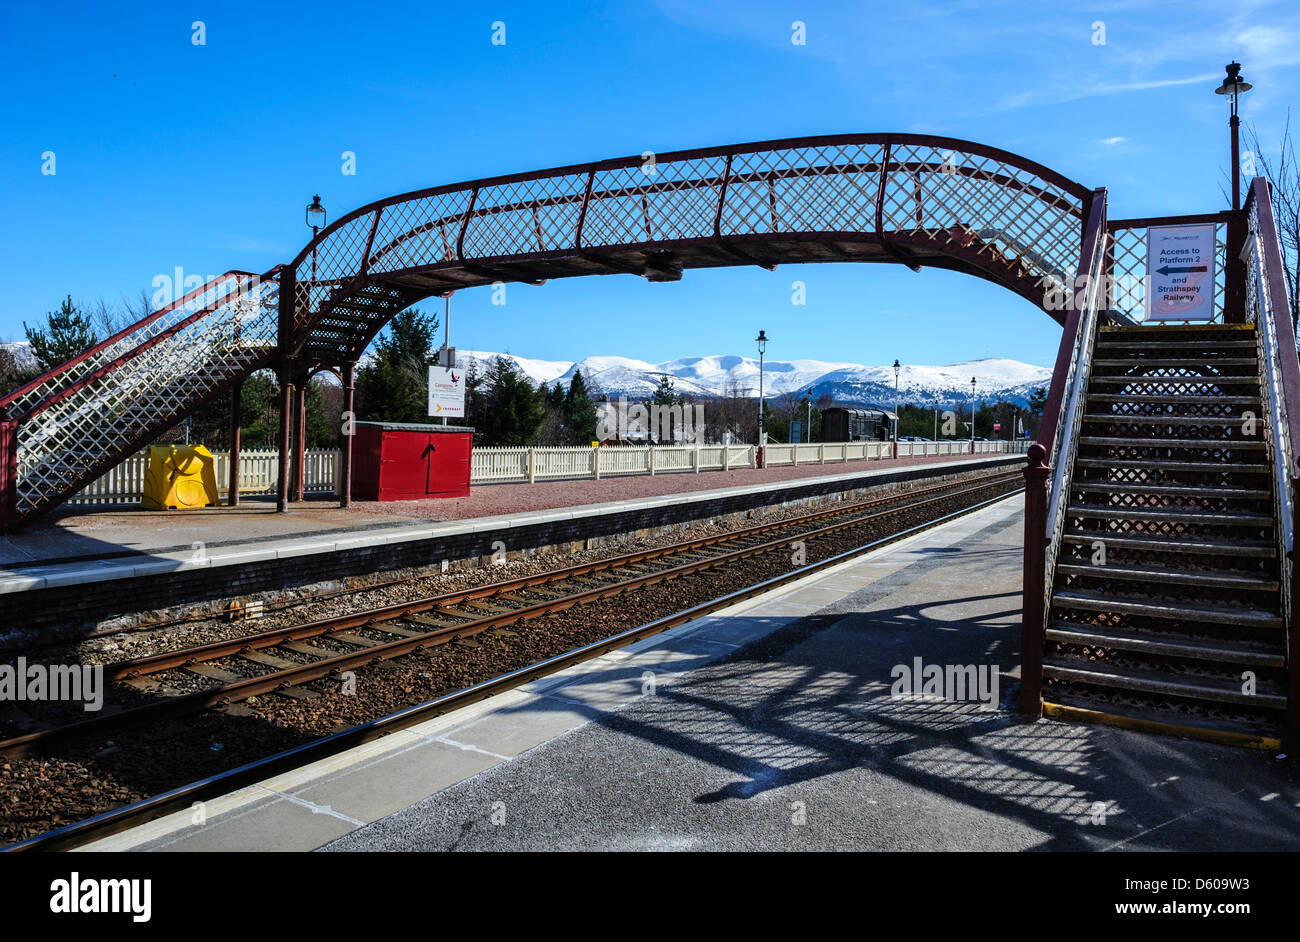 Aviemore railway station serves the town and tourist resort of Aviemore in the Highlands of Scotland. Stock Photo